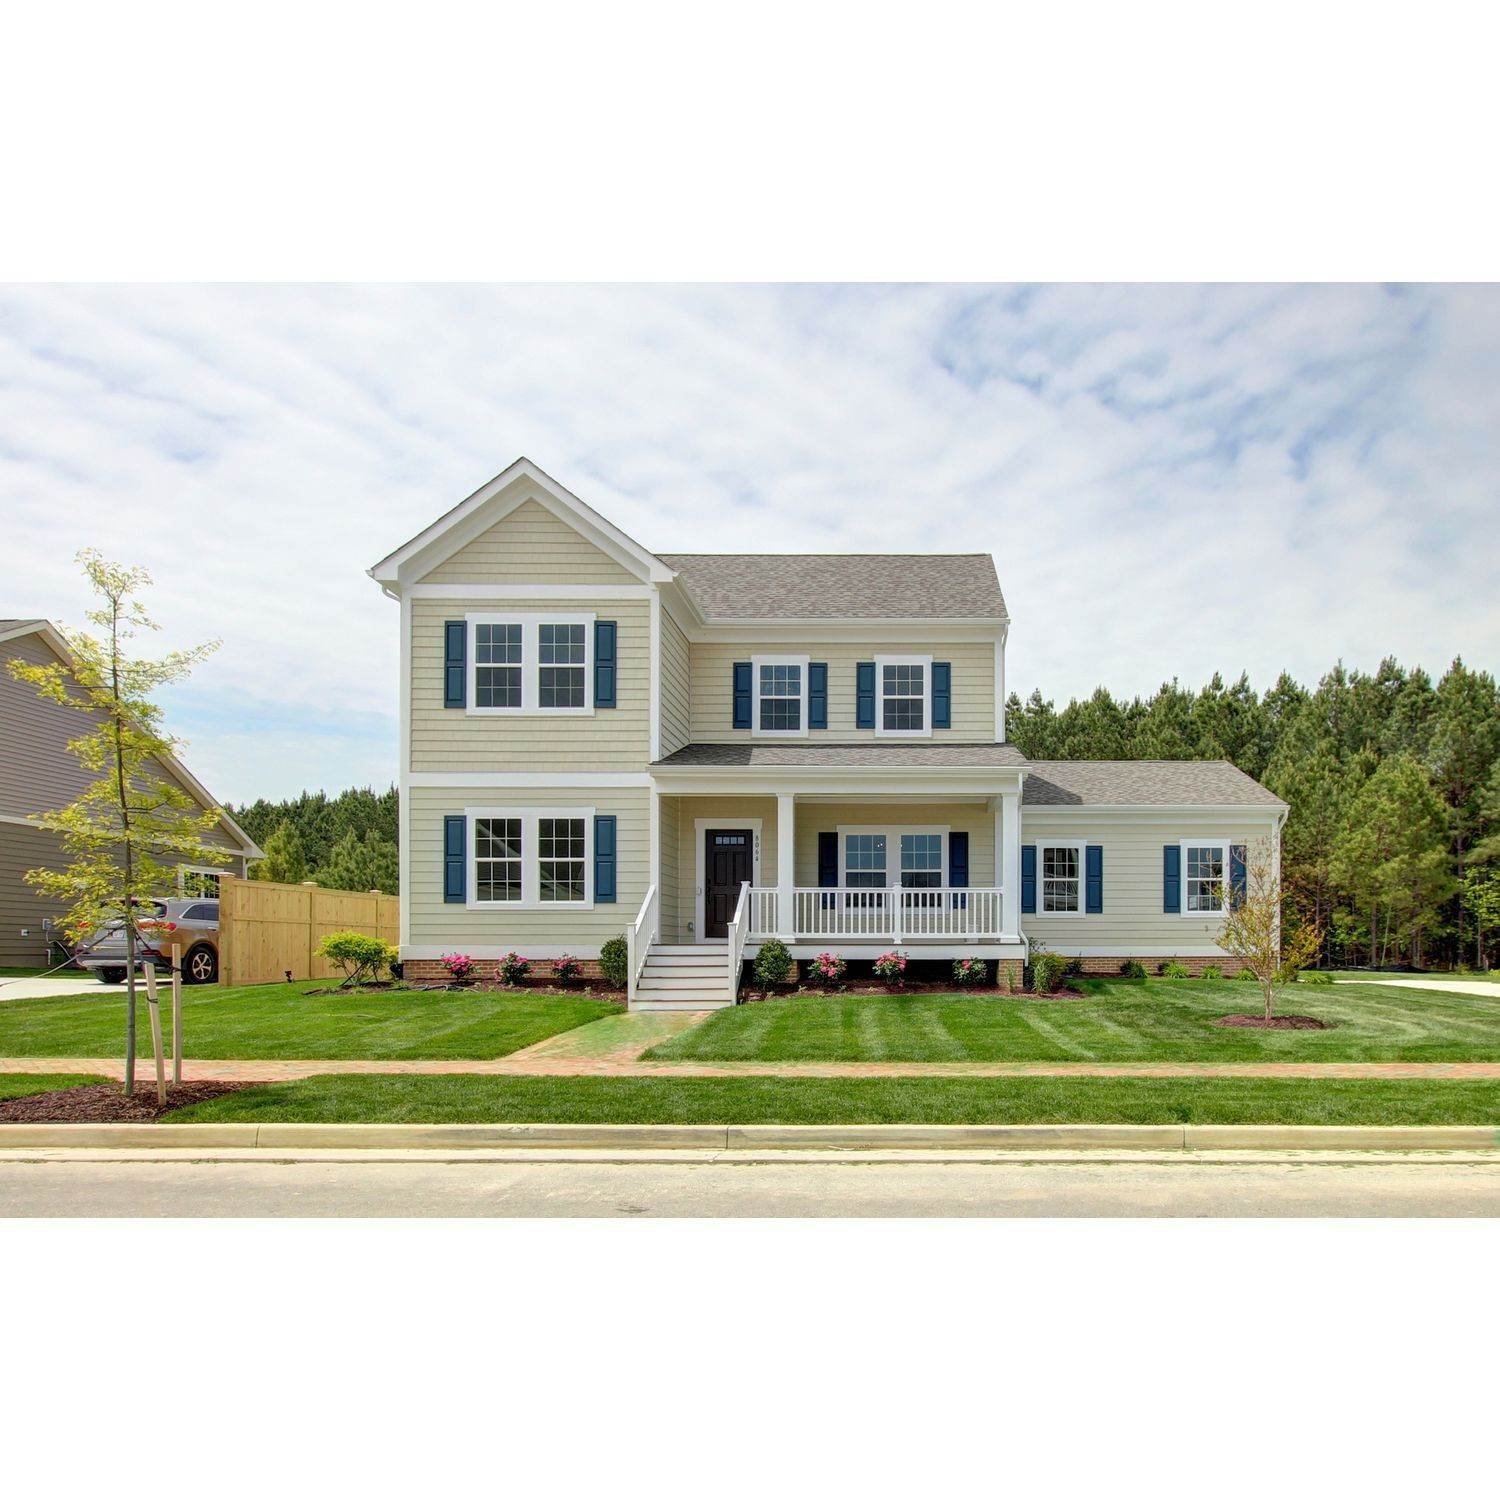 4. Covell Signature Homes byggnad vid 110 Channel Marker Way, Grasonville, MD 21638